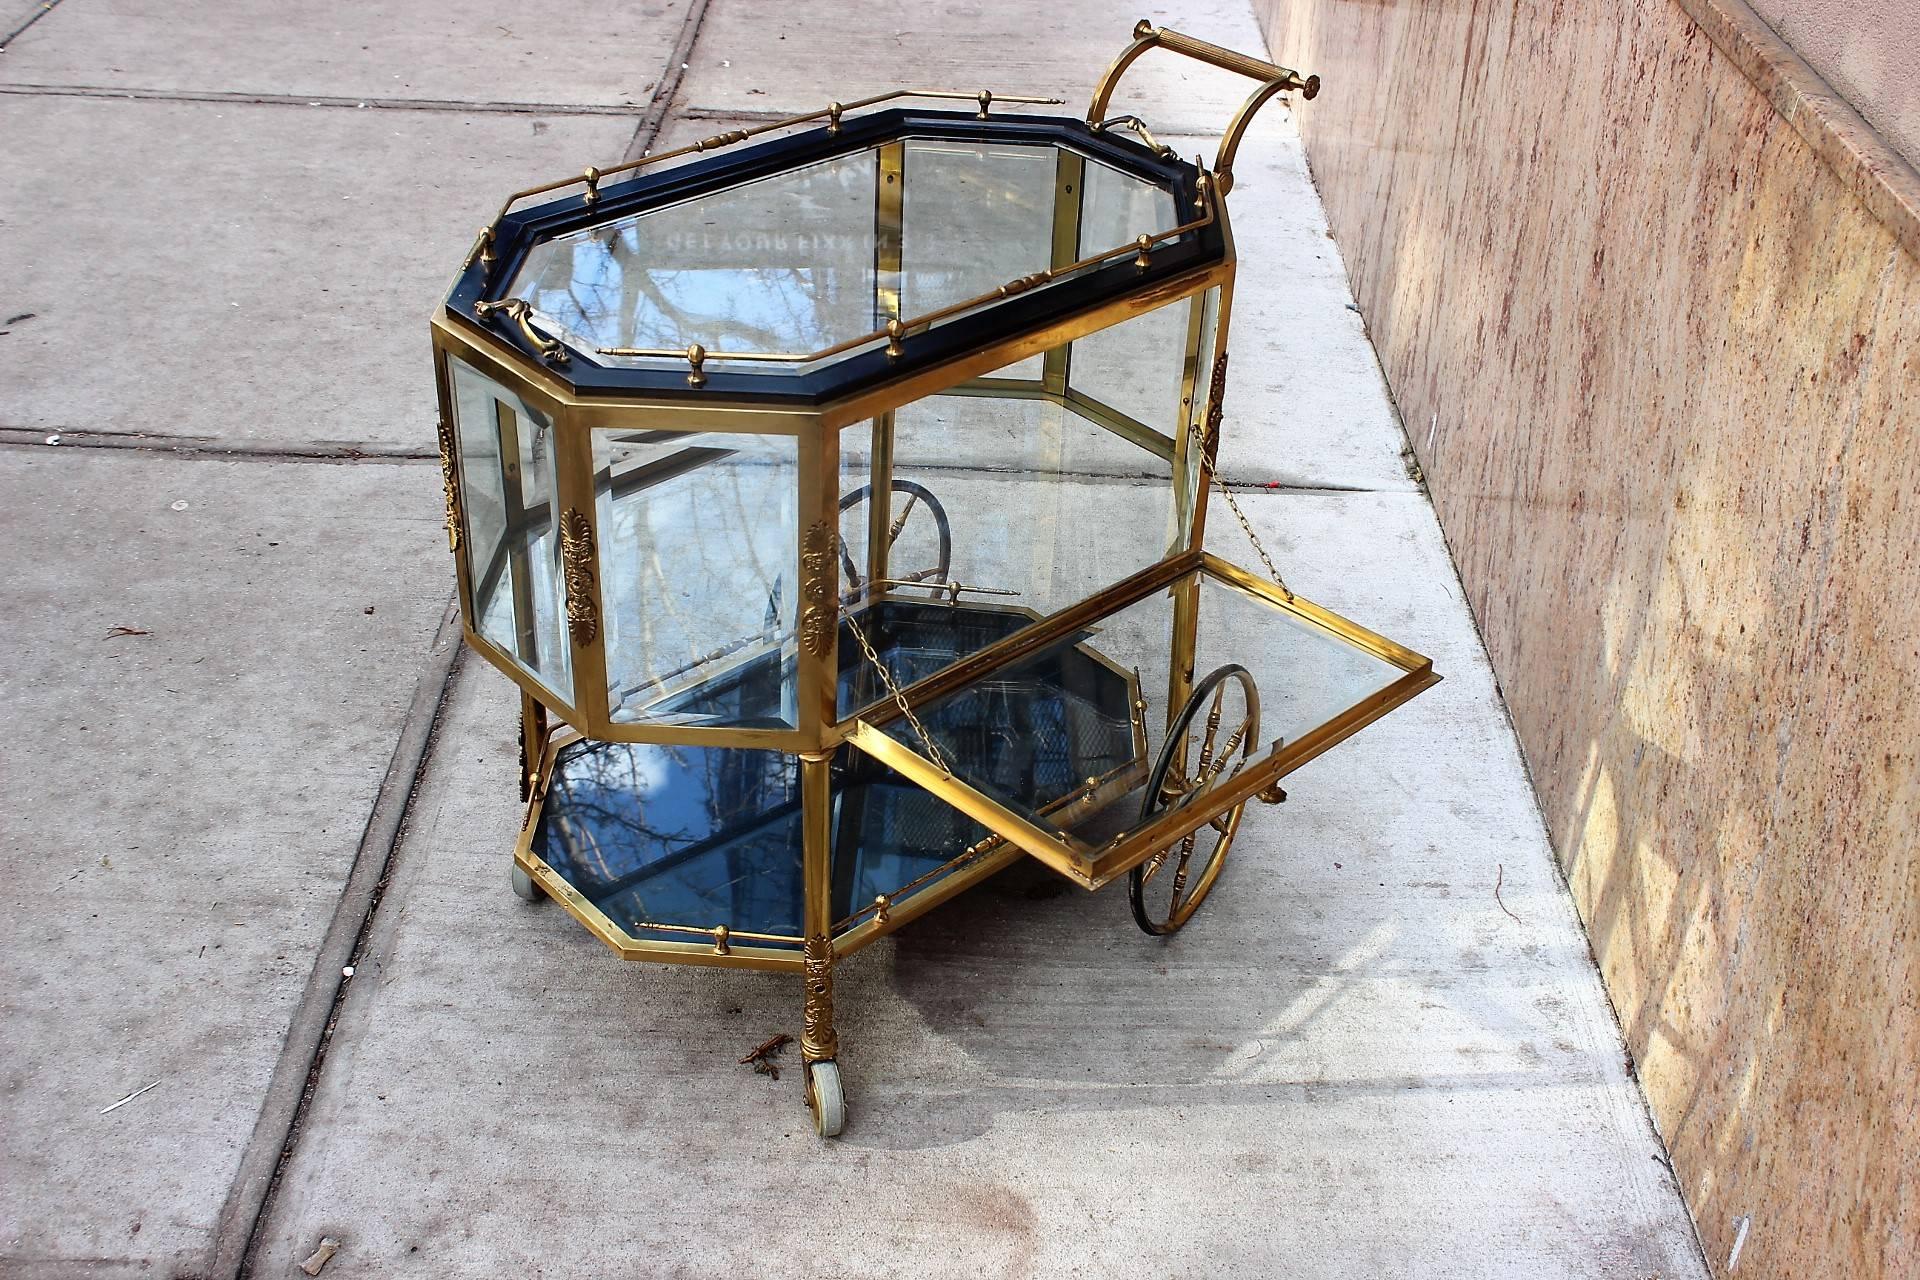 A brass tea trolley or bar cart with upper and lower galleries, glass-topped trays and accented ormolu mounts. The top with ebonized wood trim and brass gallery is a large removable tray. The lower galleried tray is fixed in place and features clear